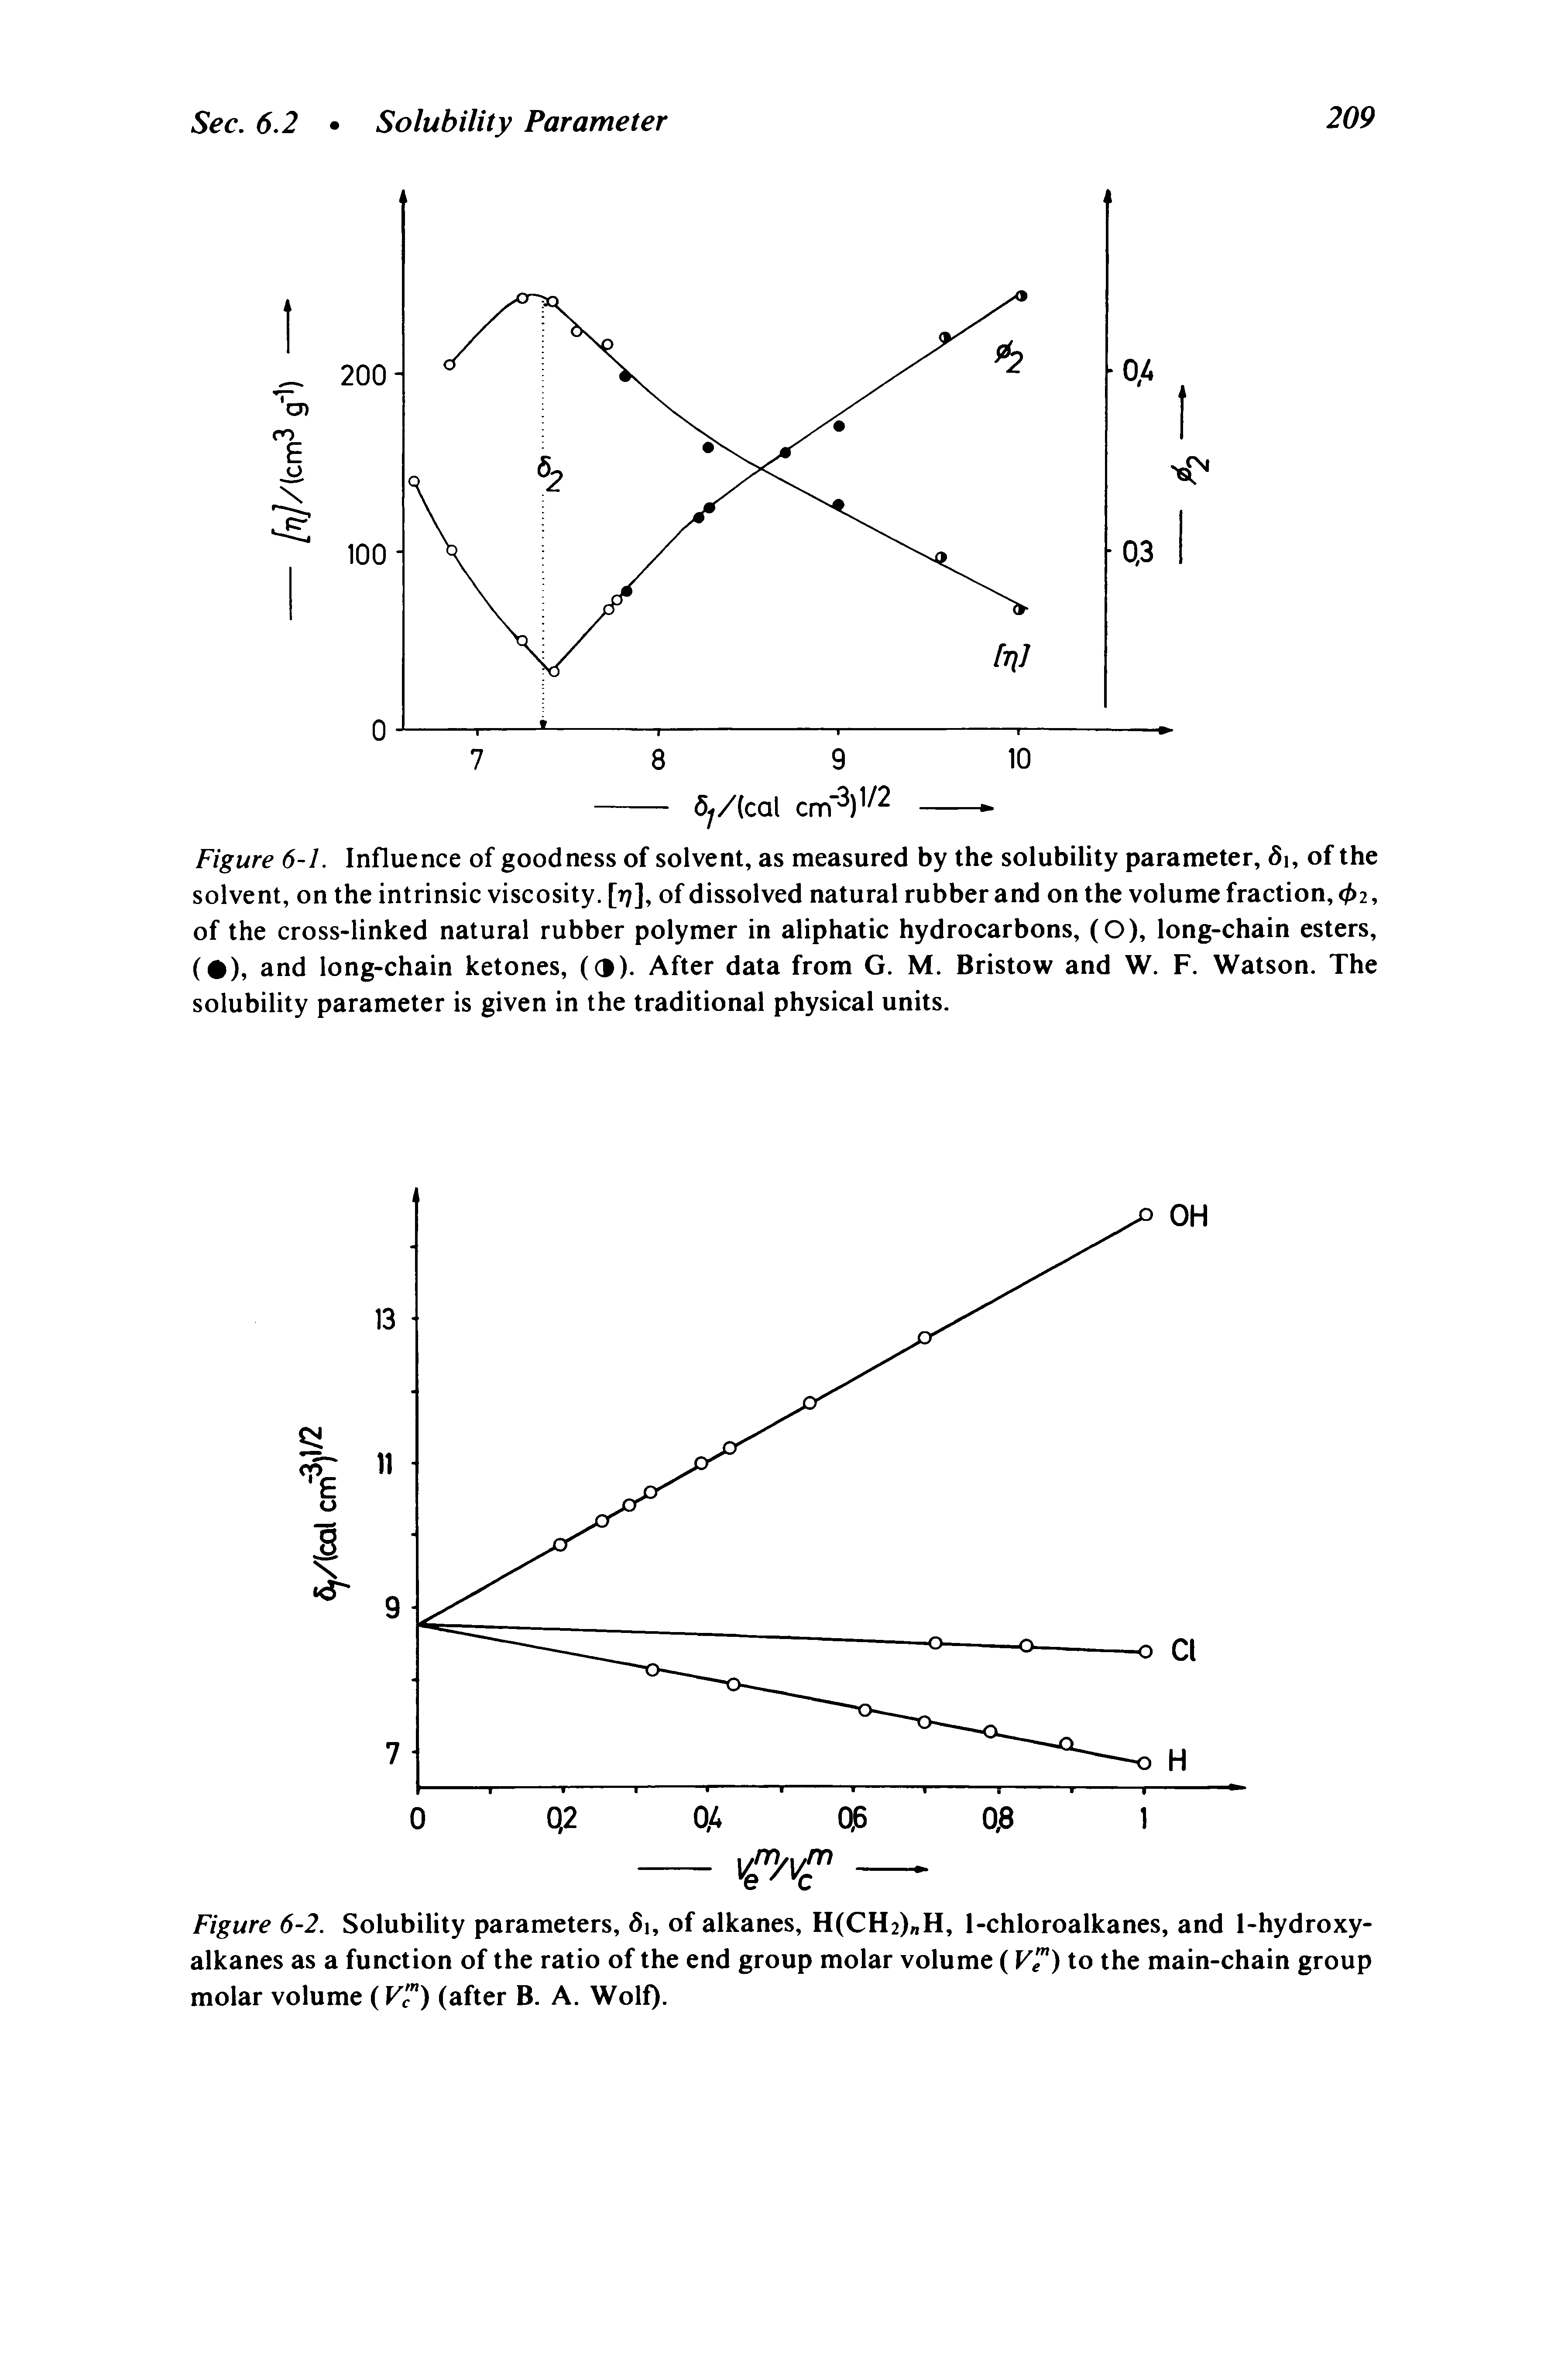 Figure 6-1. Influence of goodness of solvent, as measured by the solubility parameter, 6i, of the solvent, on the intrinsic viscosity. [17], of dissolved natural rubber and on the volume fraction, 02, of the cross-linked natural rubber polymer in aliphatic hydrocarbons, (O), long-chain esters, ( ), and long-chain ketones, (O). After data from G. M. Bristow and W. F. Watson. The solubility parameter is given in the traditional physical units.